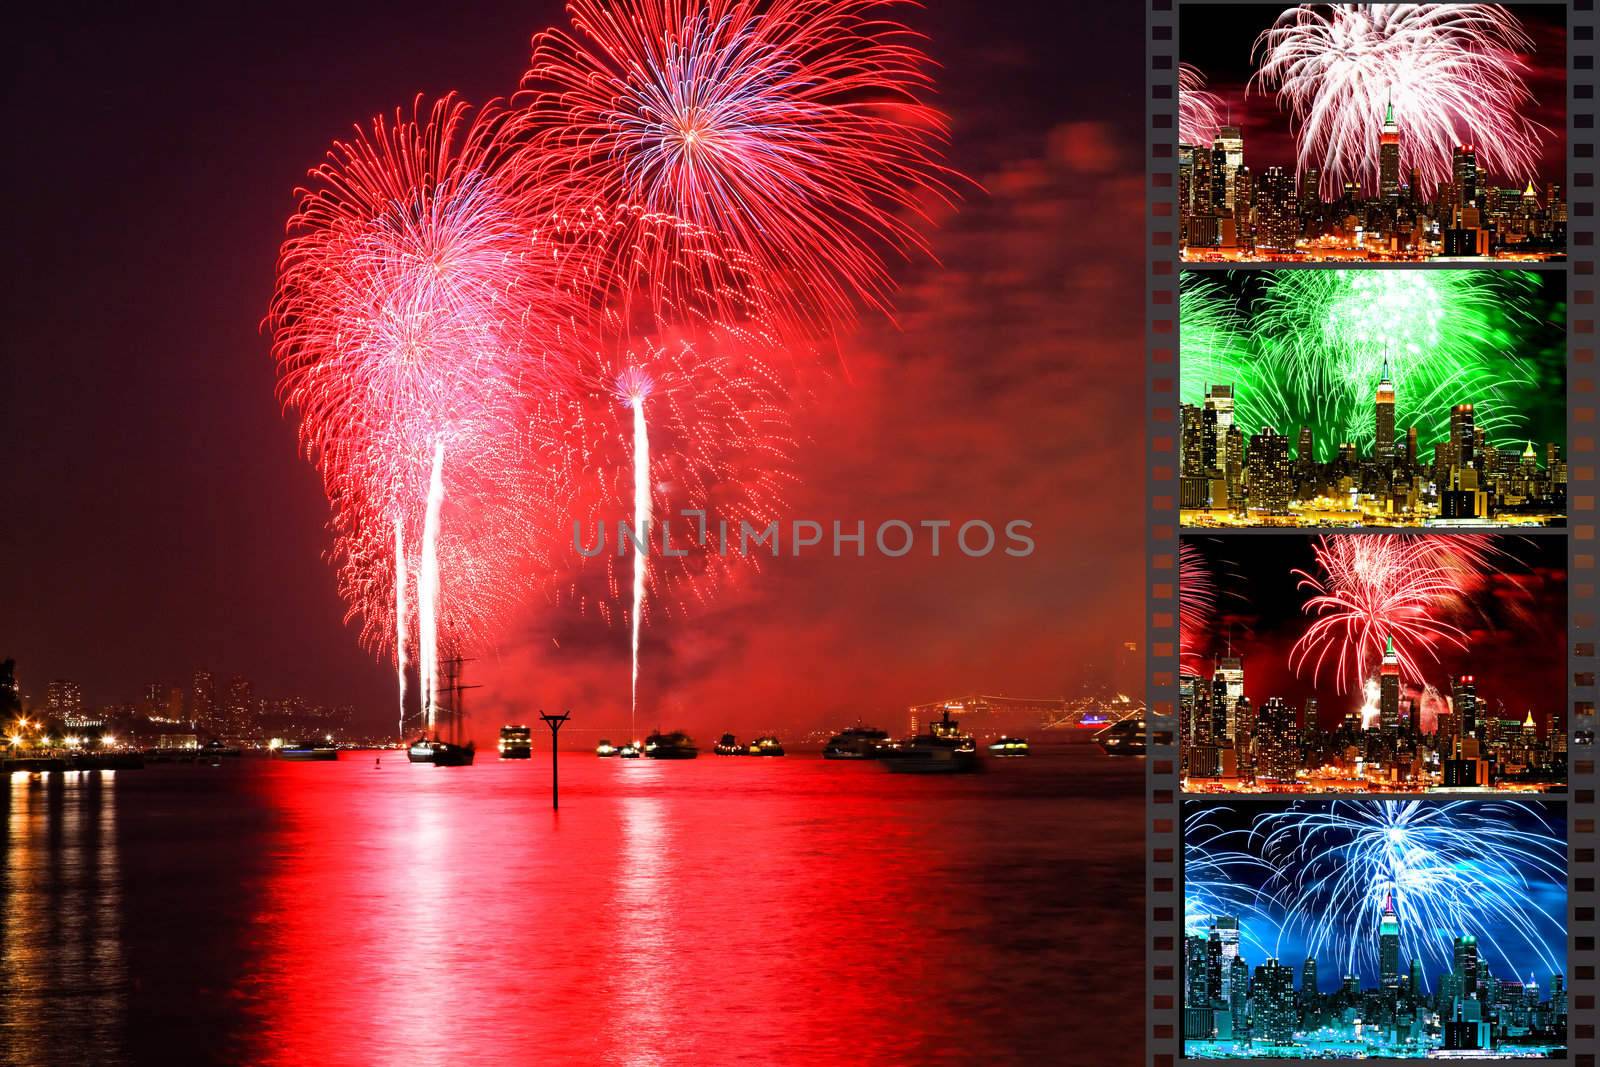  the Macy's 4th of July fireworks displays by gary718